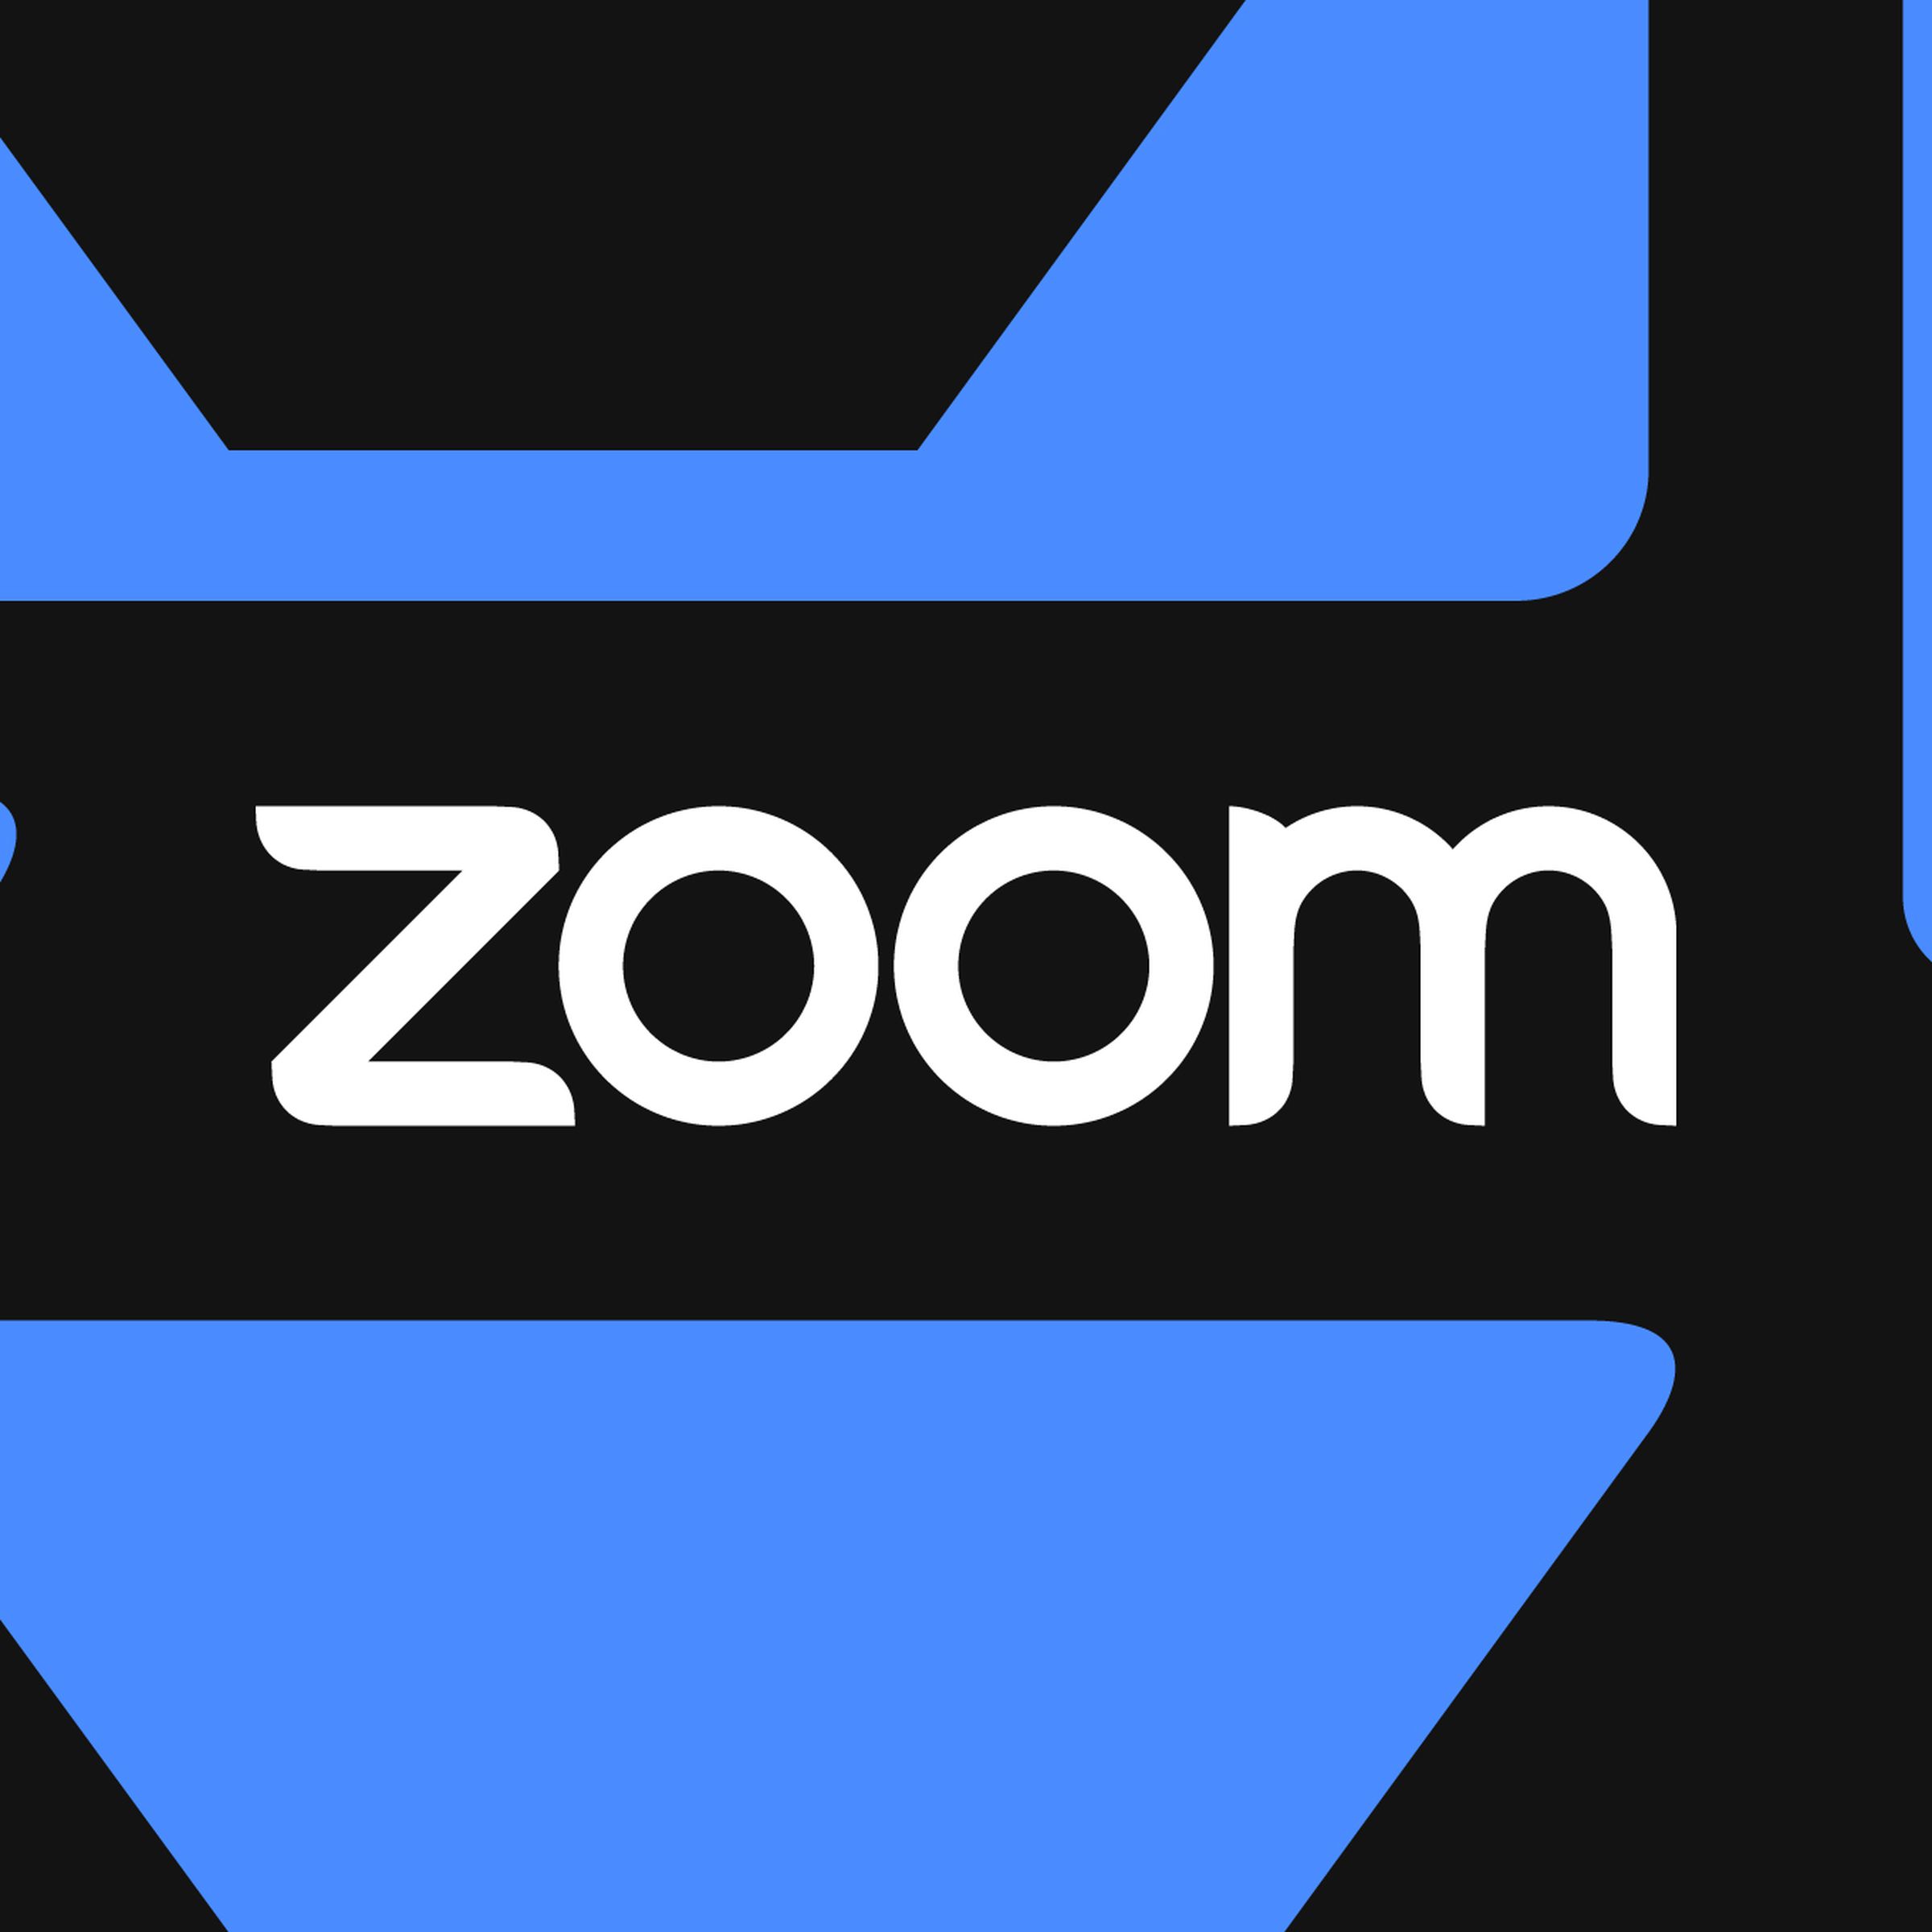 Illustration of the Zoom logo on a blue and black background.